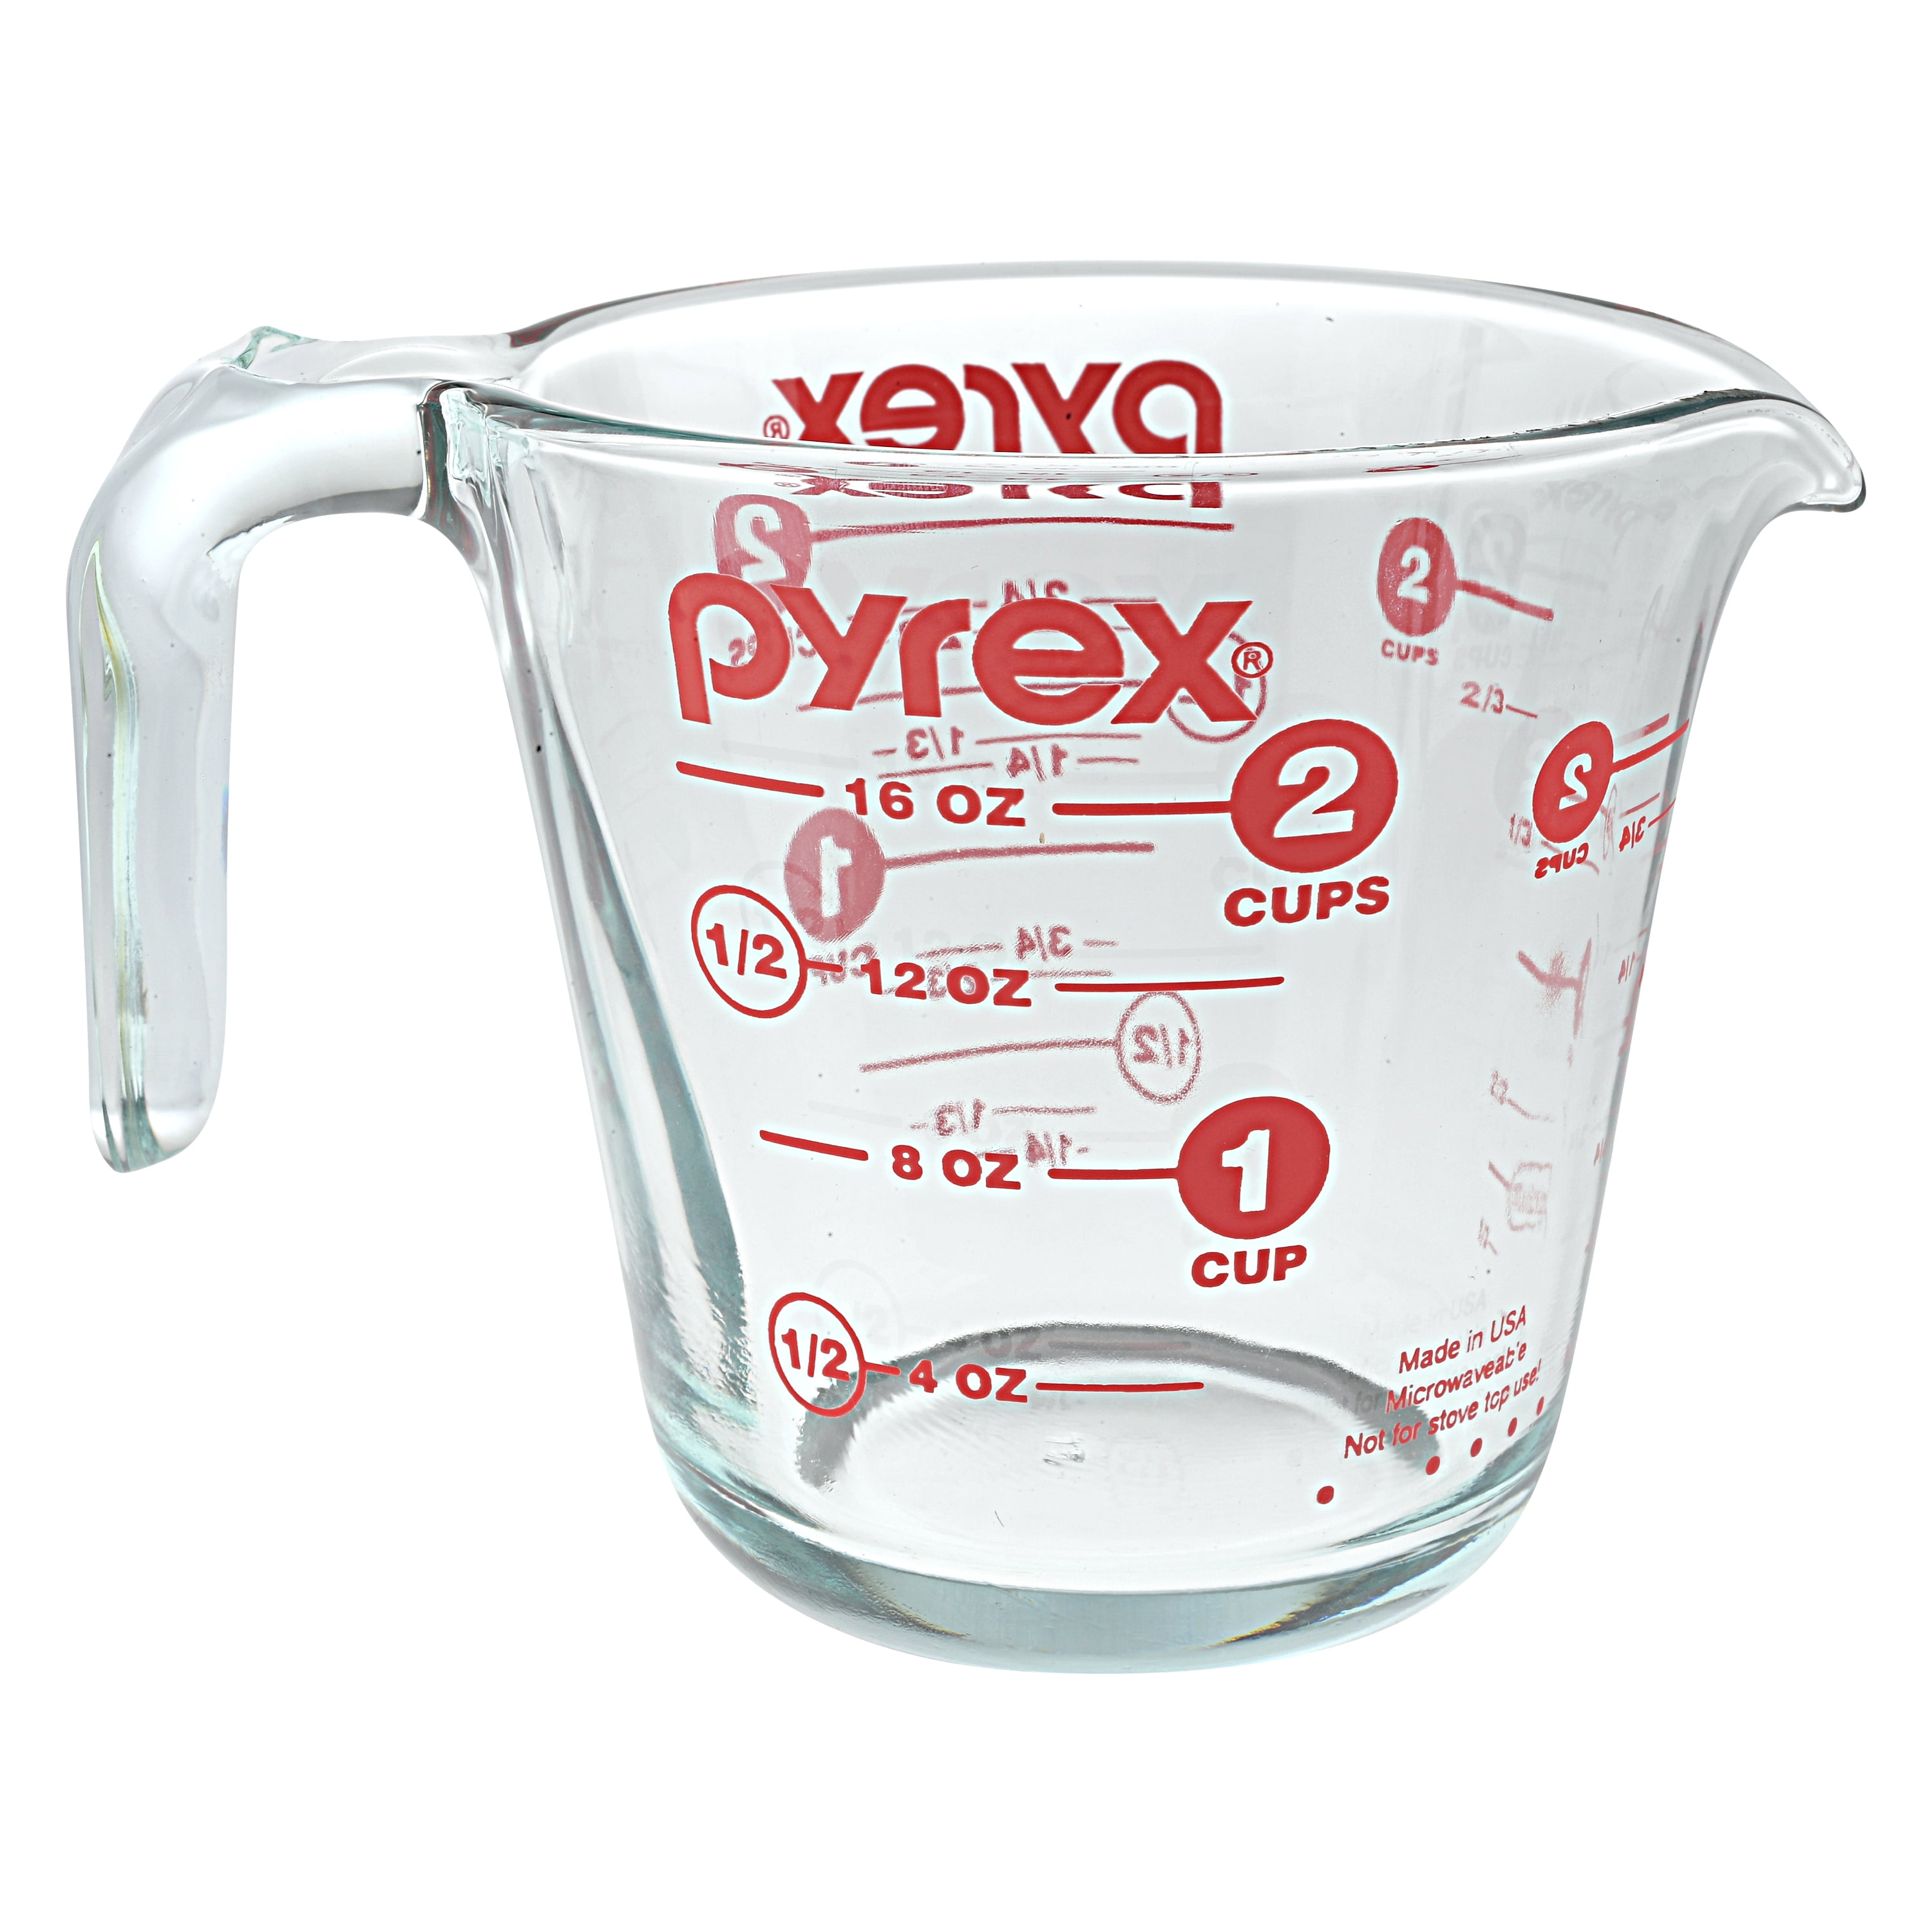 VTG Pyrex Glass Measuring Cup Red Lettering Size 1 Cup 250 ml EUC